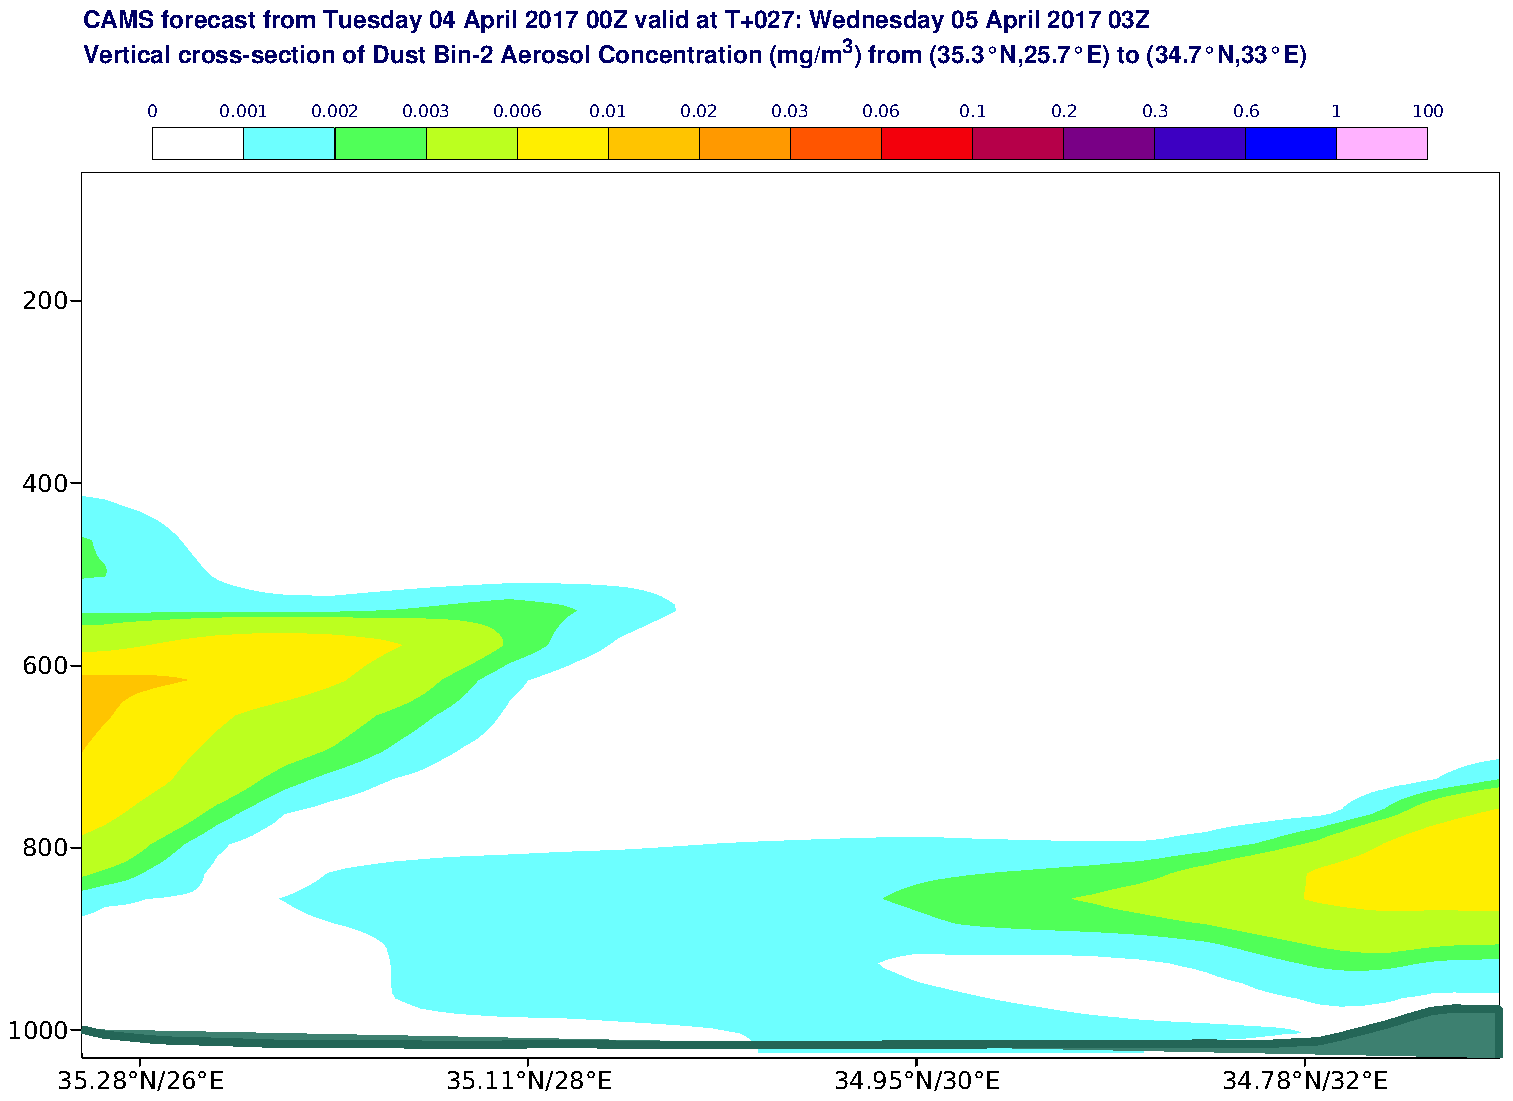 Vertical cross-section of Dust Bin-2 Aerosol Concentration (mg/m3) valid at T27 - 2017-04-05 03:00